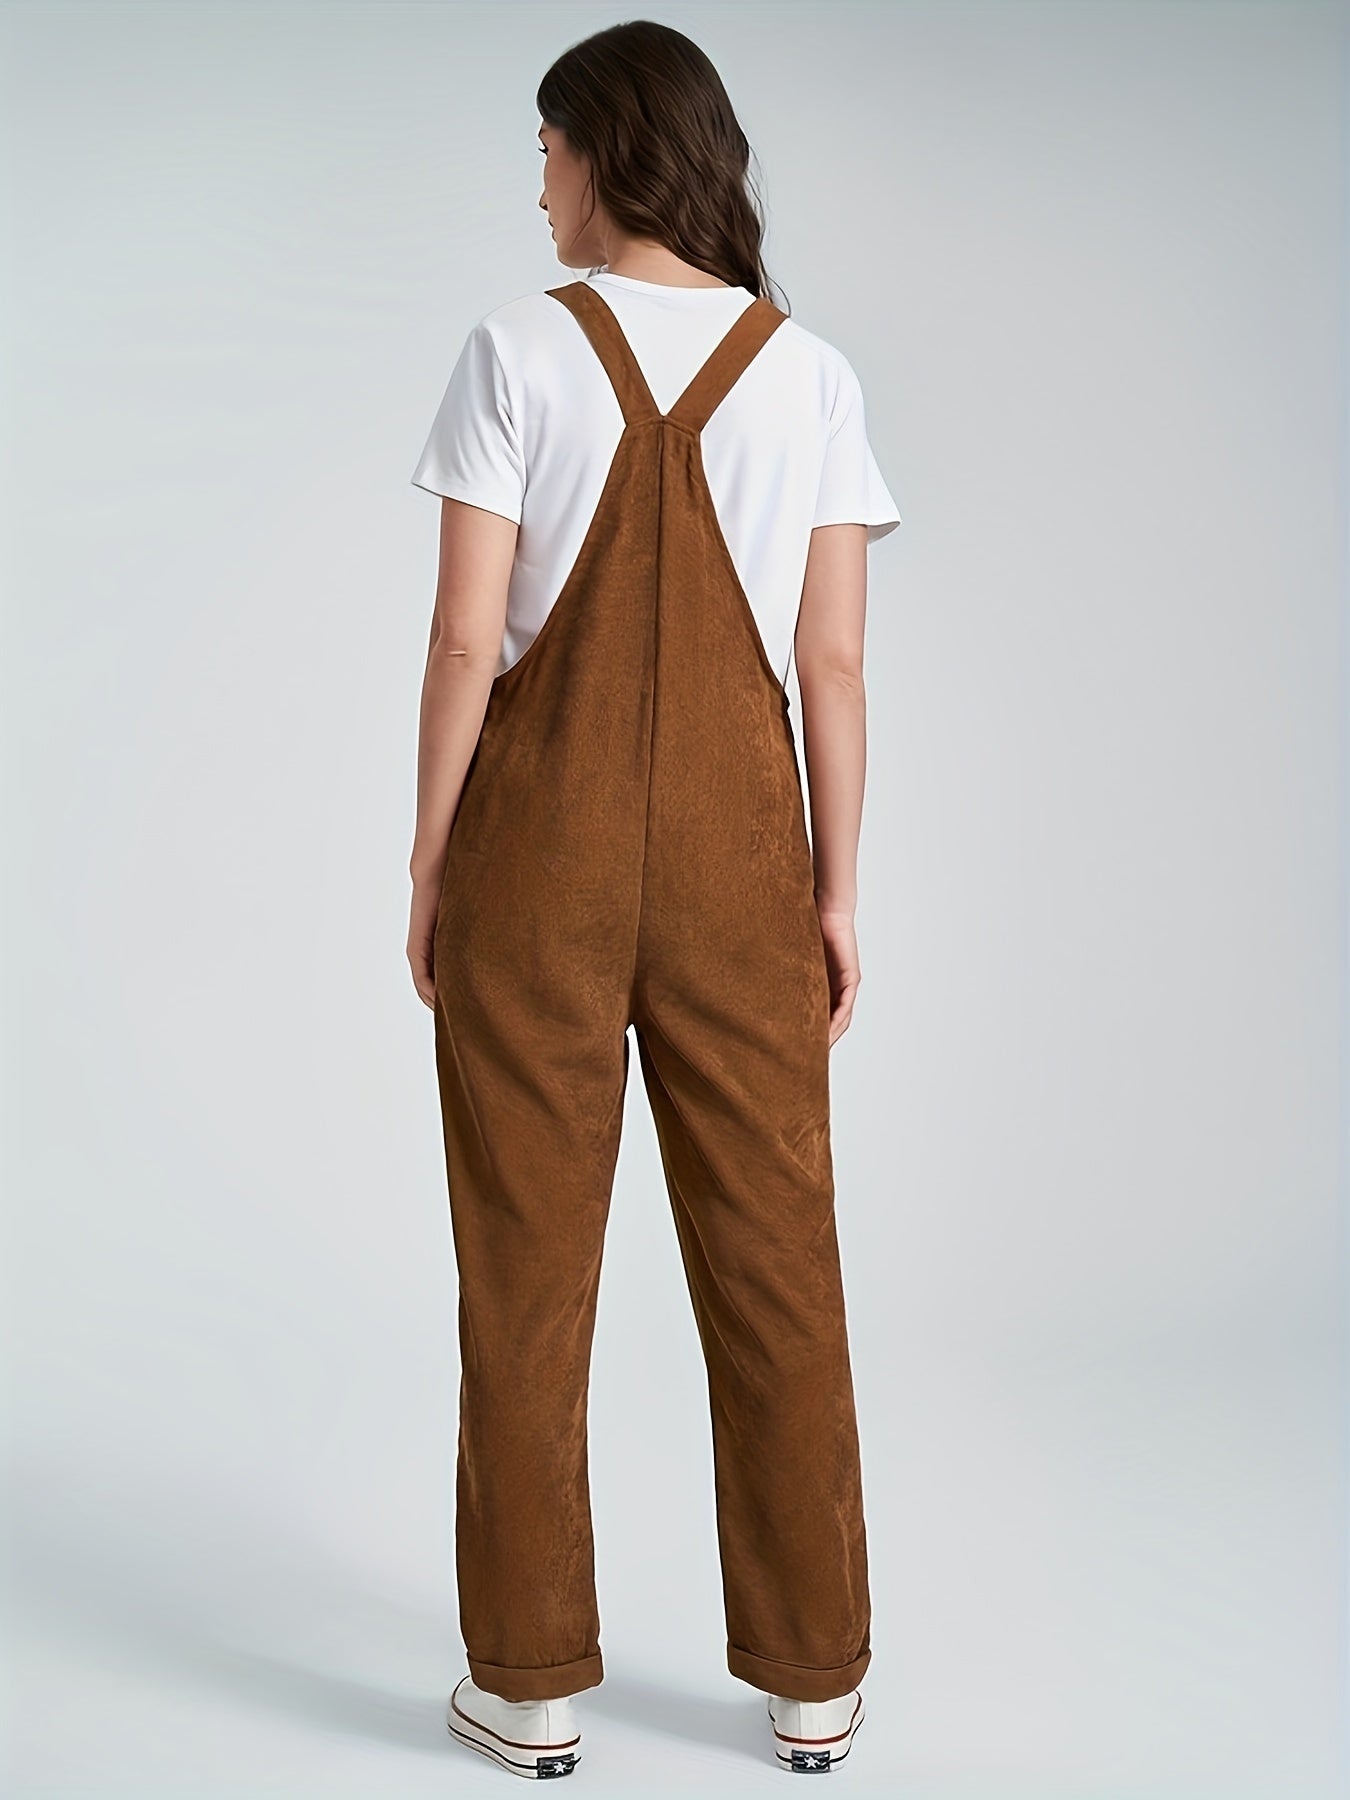 Antmvs Solid Color Overall Jumpsuit, Casual Dual Pockets Button Overall Jumpsuit For Spring & Fall, Women's Clothing